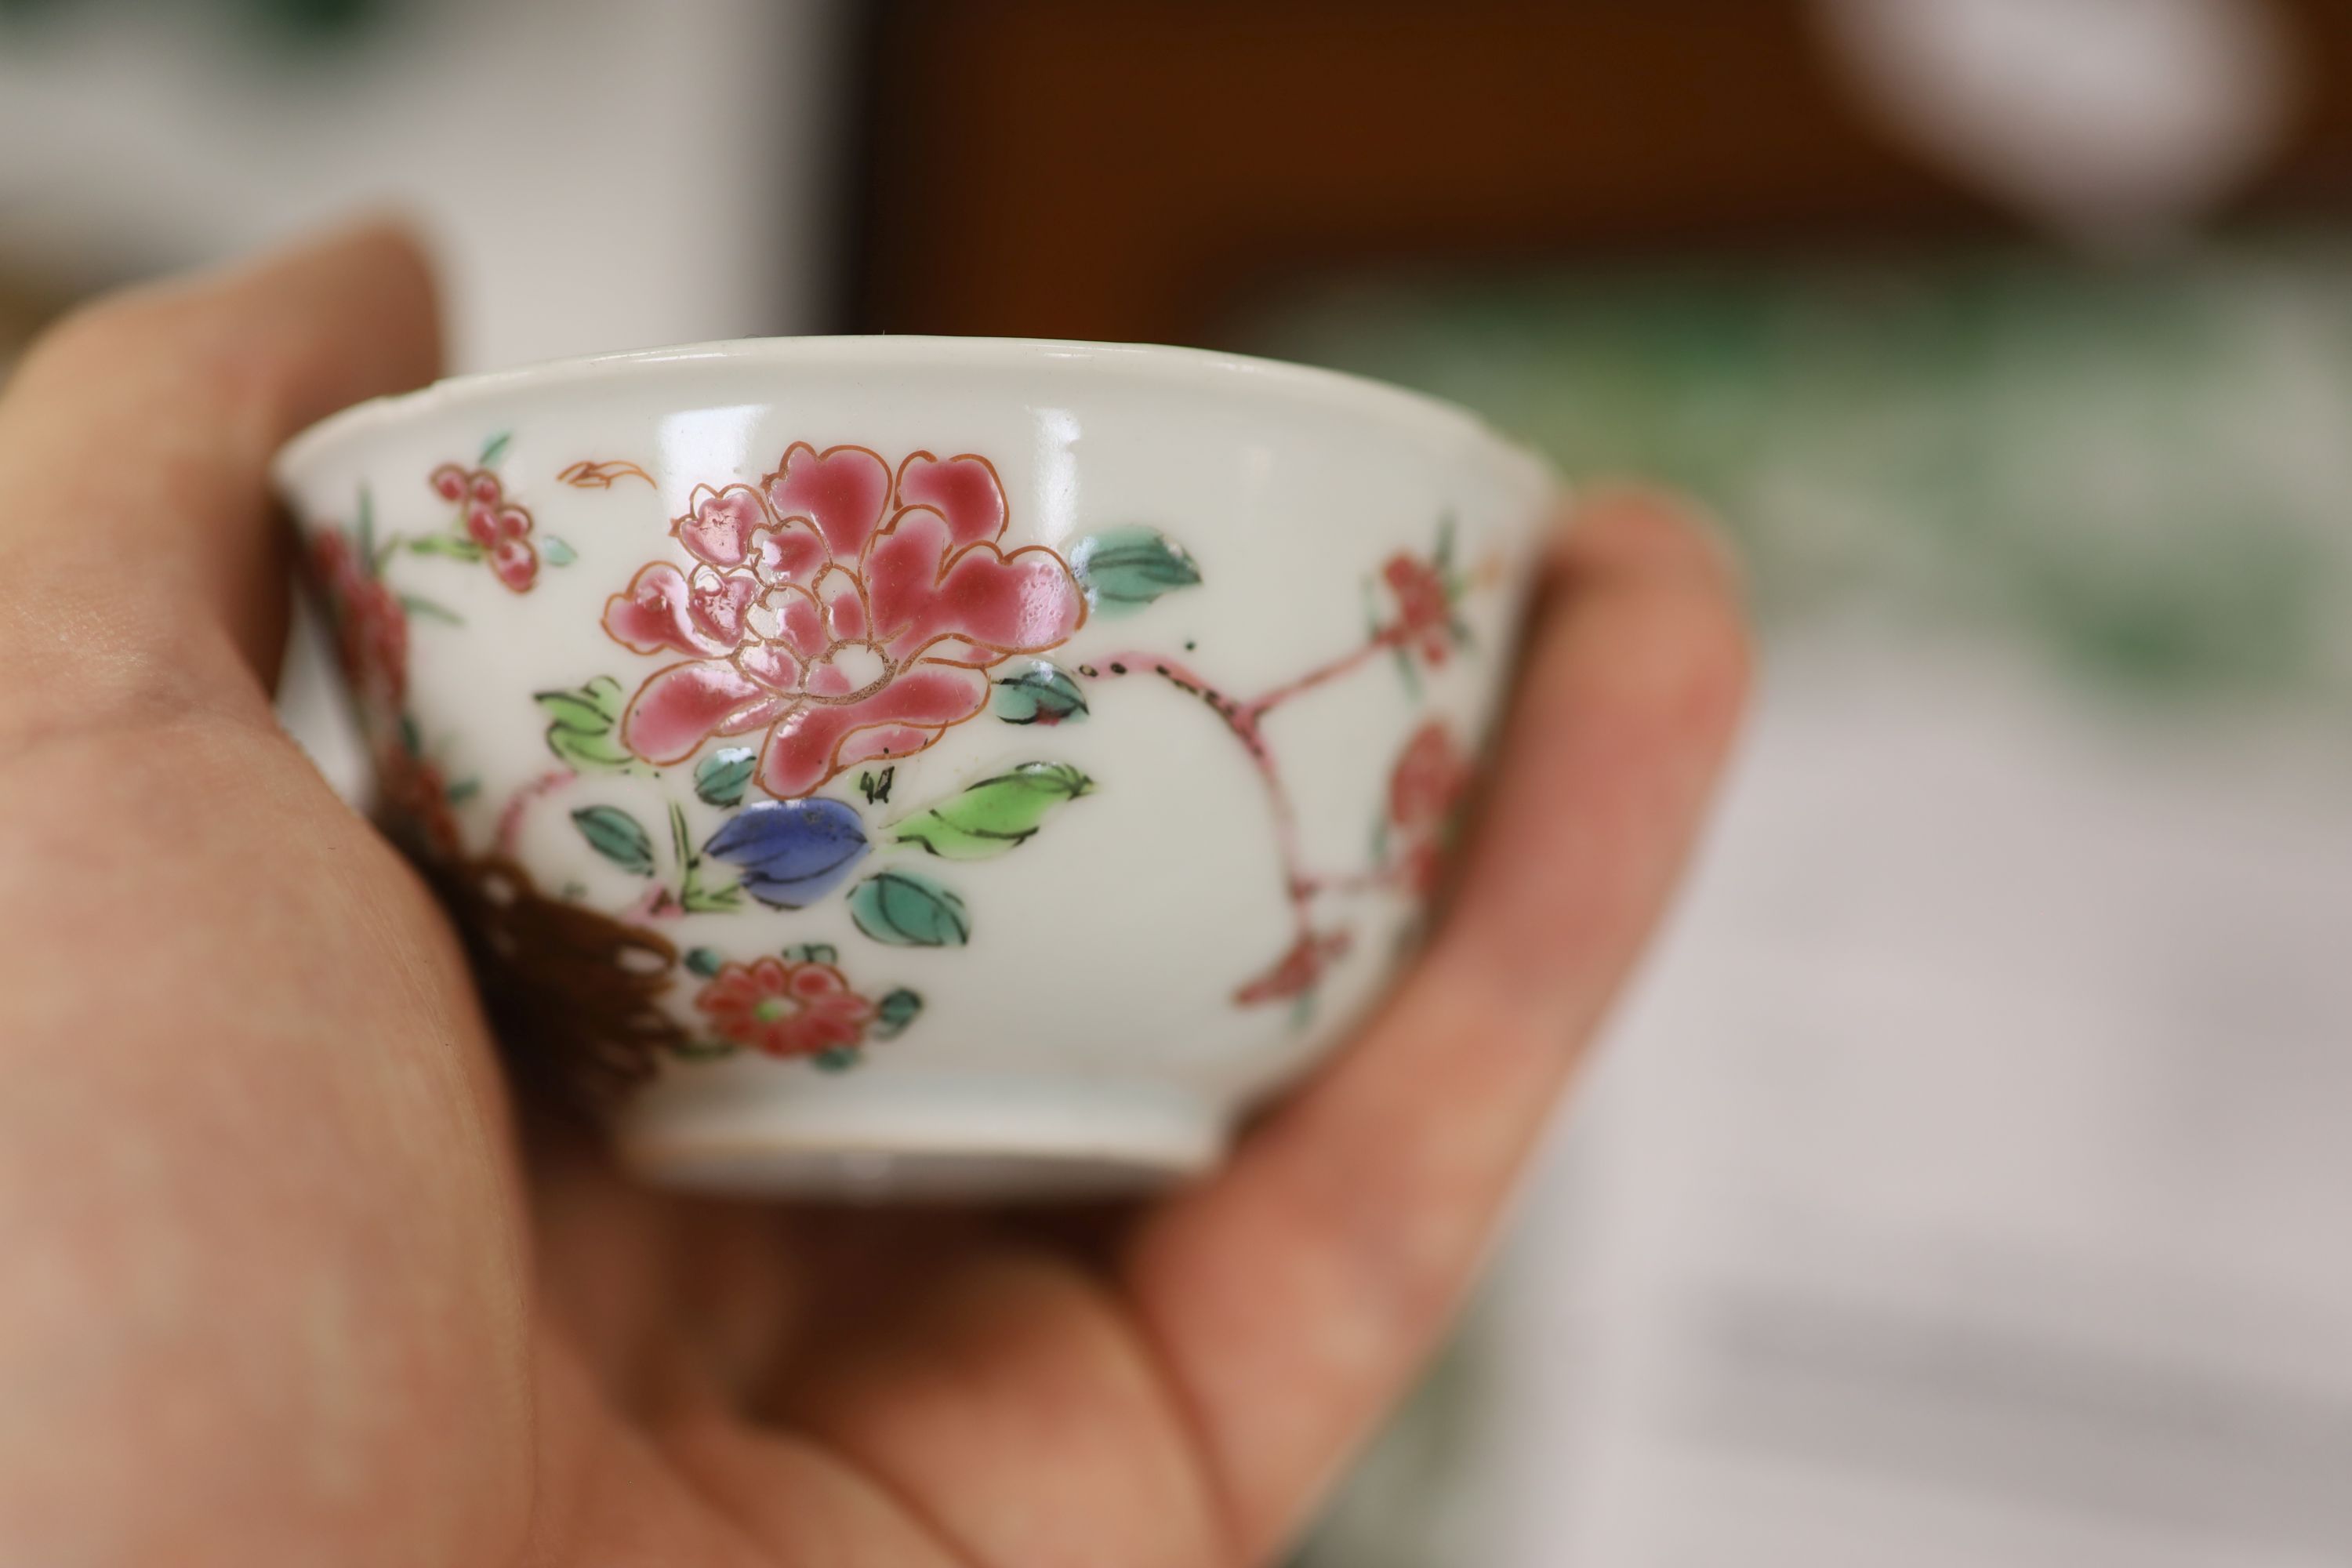 Three 18th century Chinese famille rose or Imari tea bowls together with five saucers